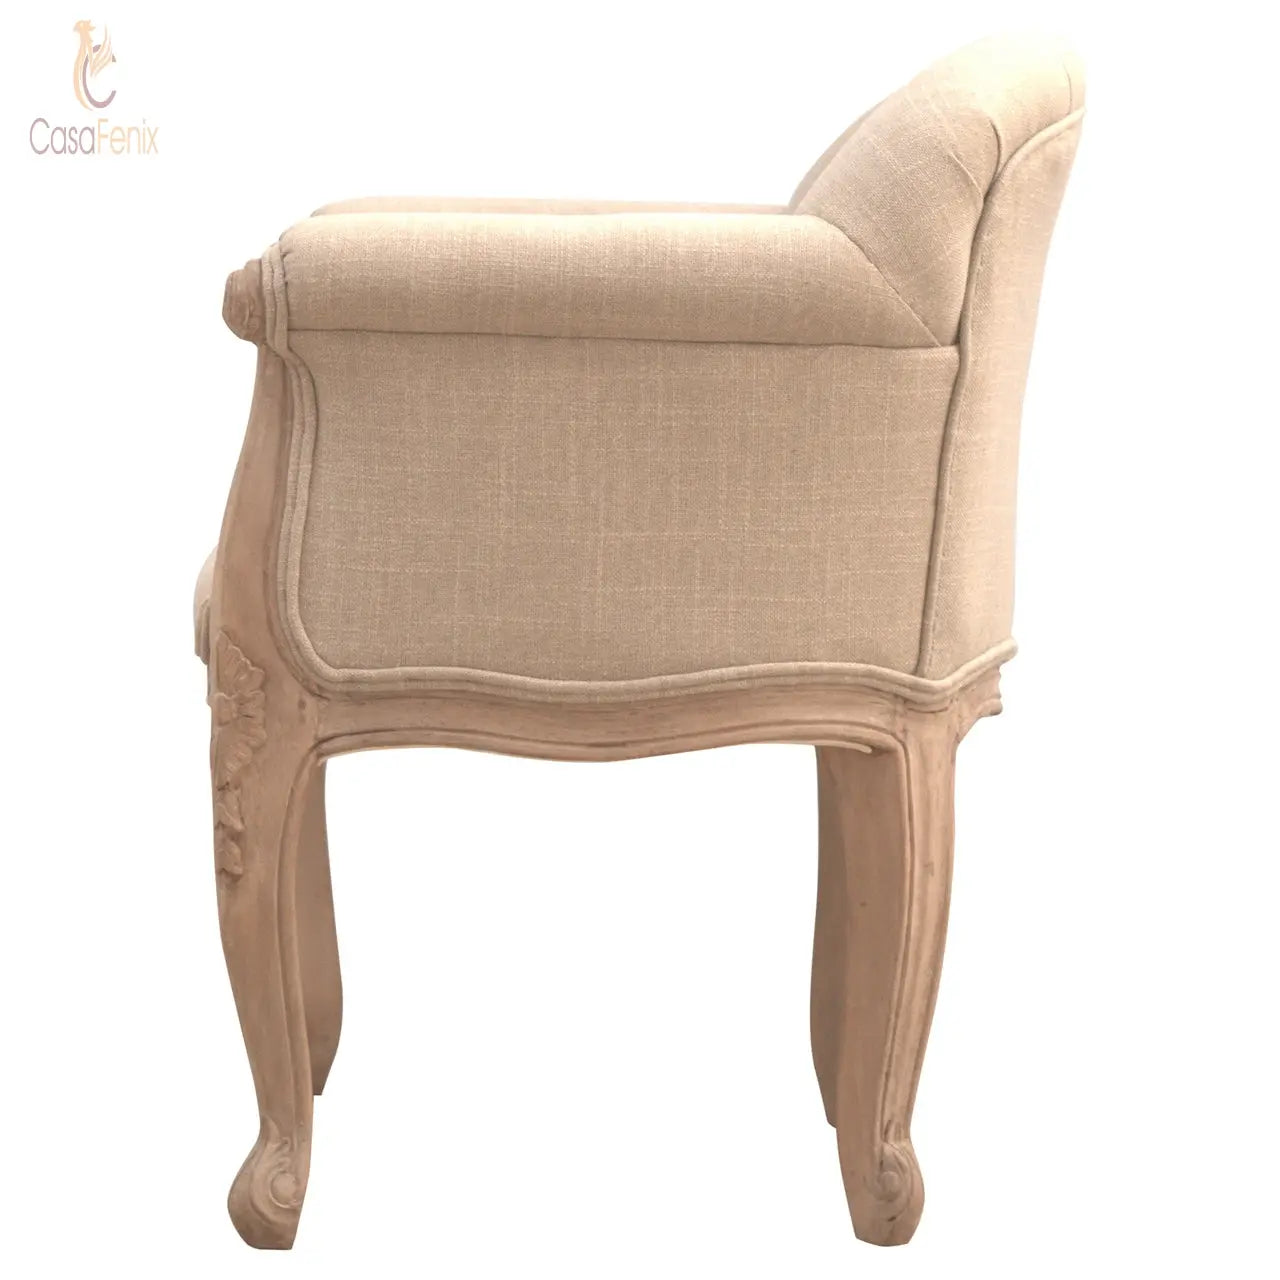 French Style Deep Button Chair 100% solid mango wood and upholstered in mud linen - CasaFenix